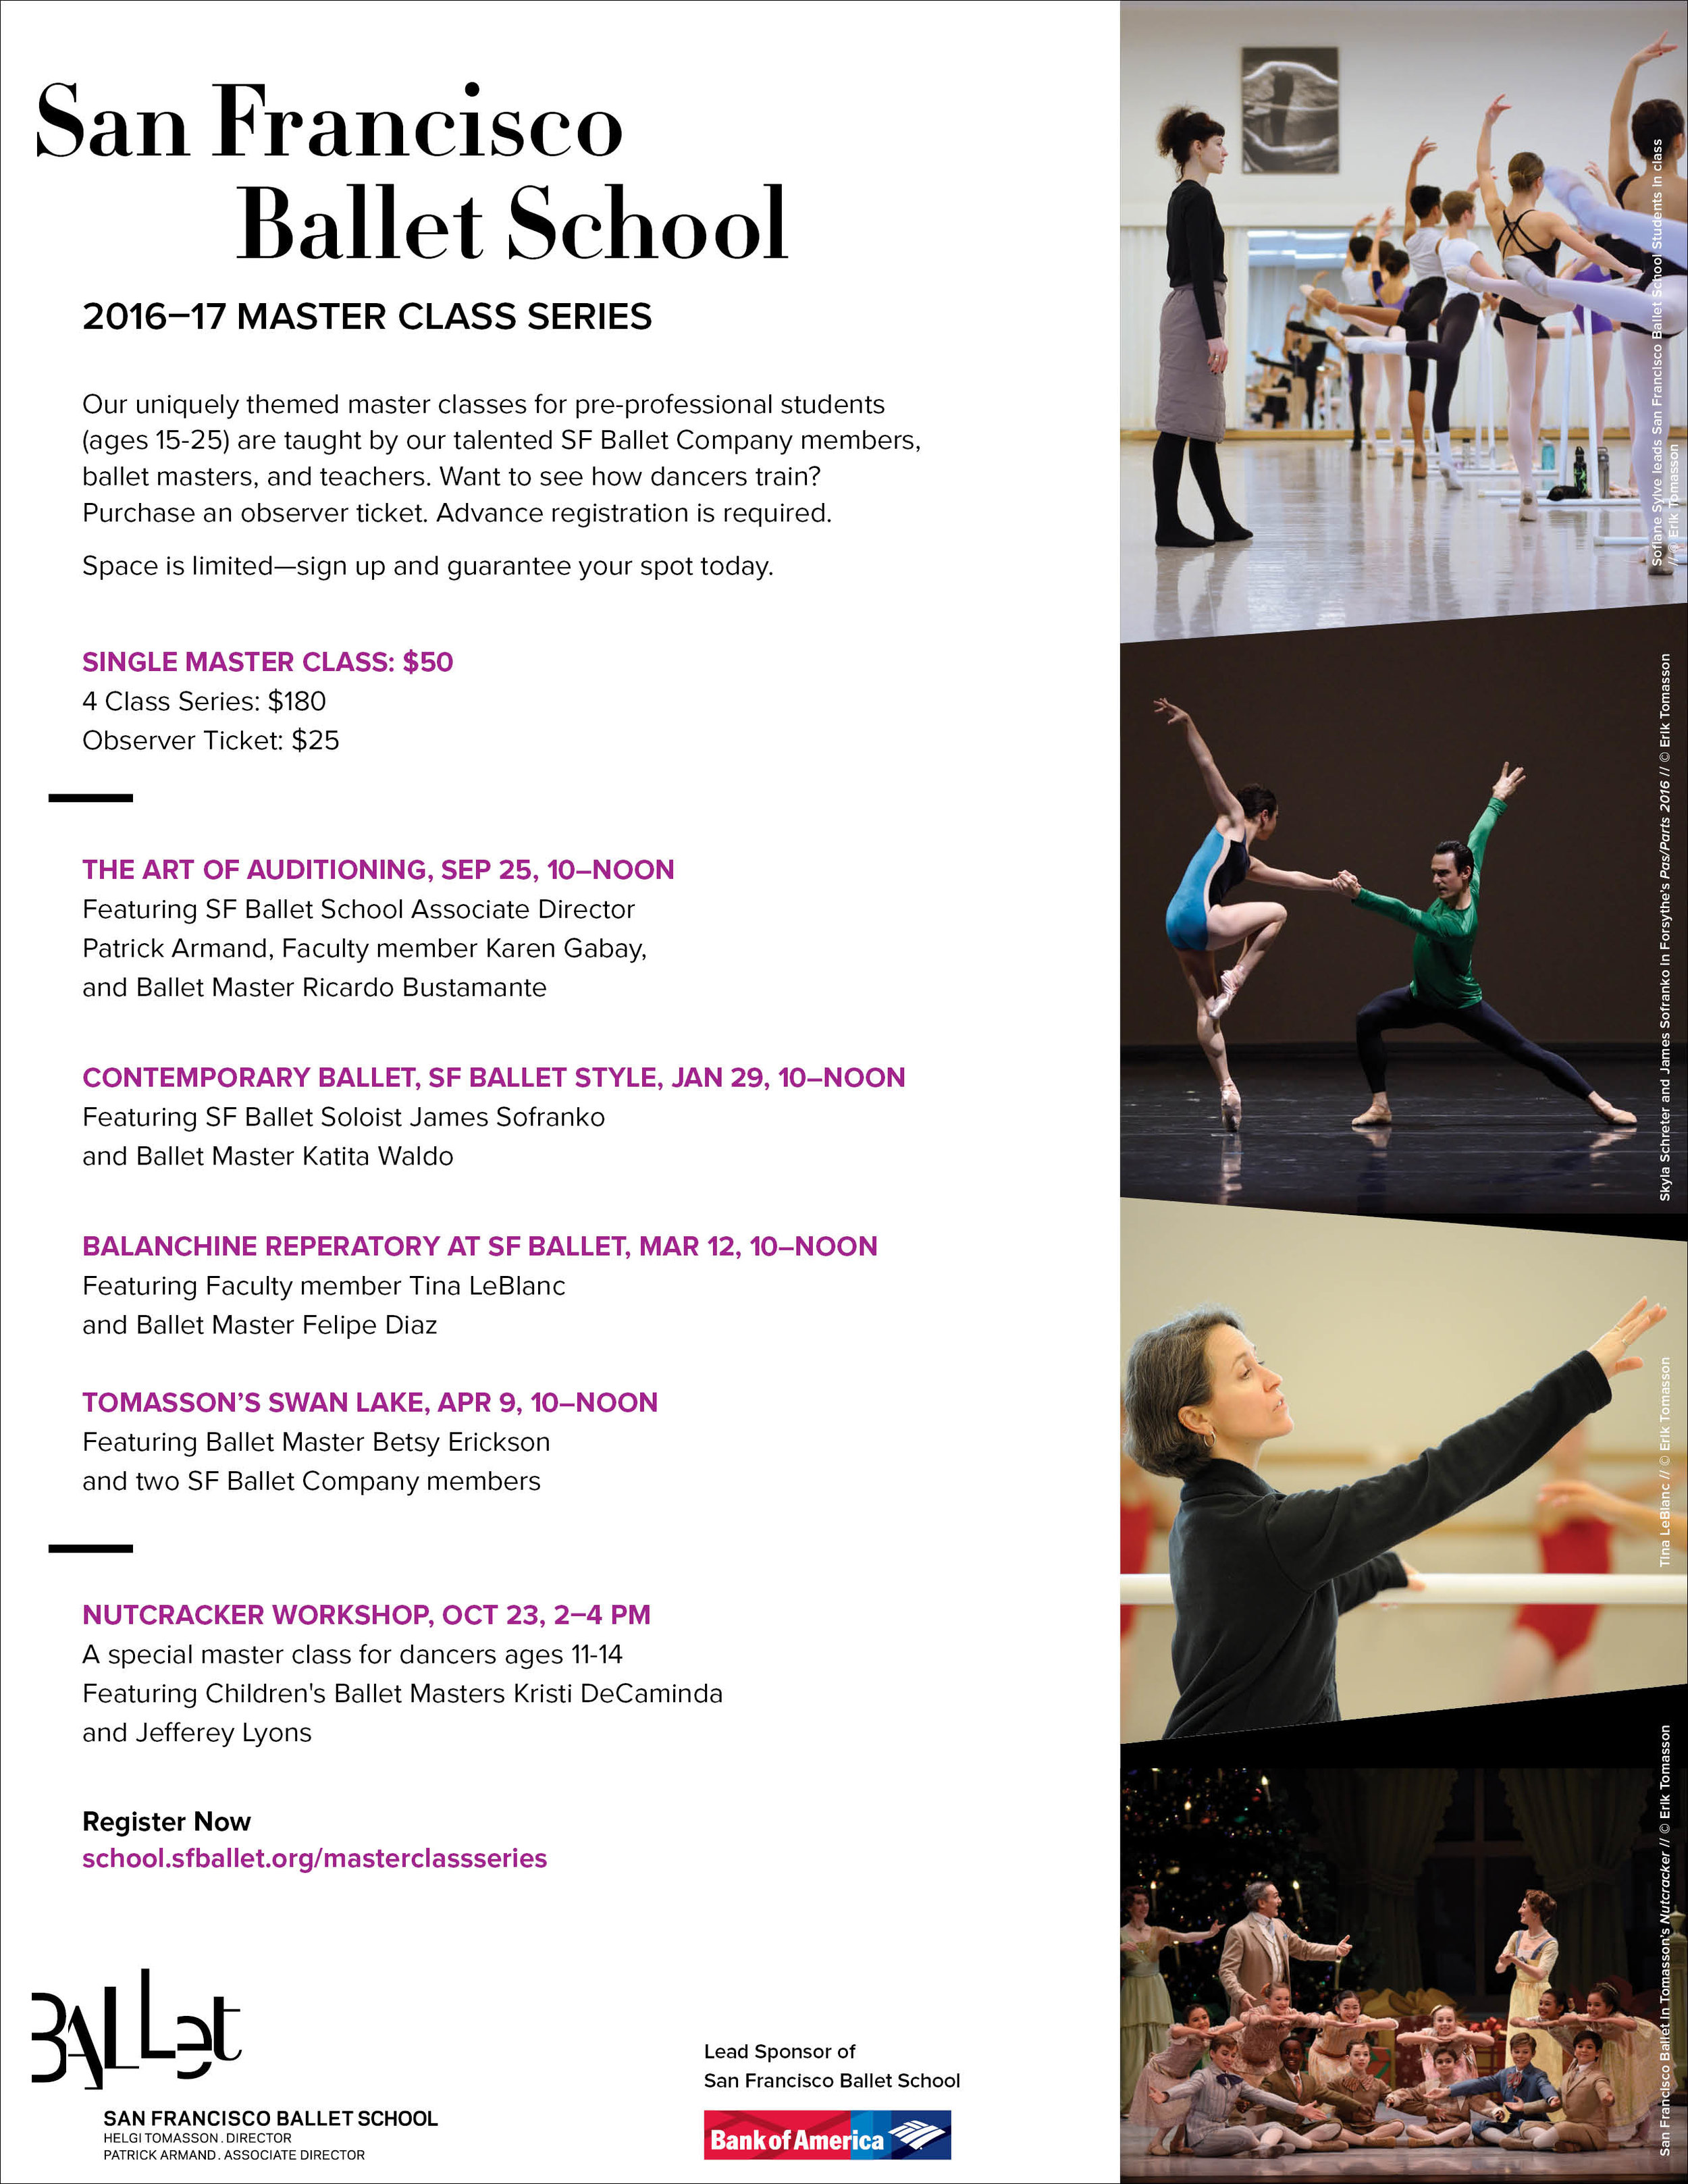  COMPANY: San Francisco Ballet  PROJECT: Flyer  MY ROLE: Designed layout according to brand guidelines along with the marketing department. 